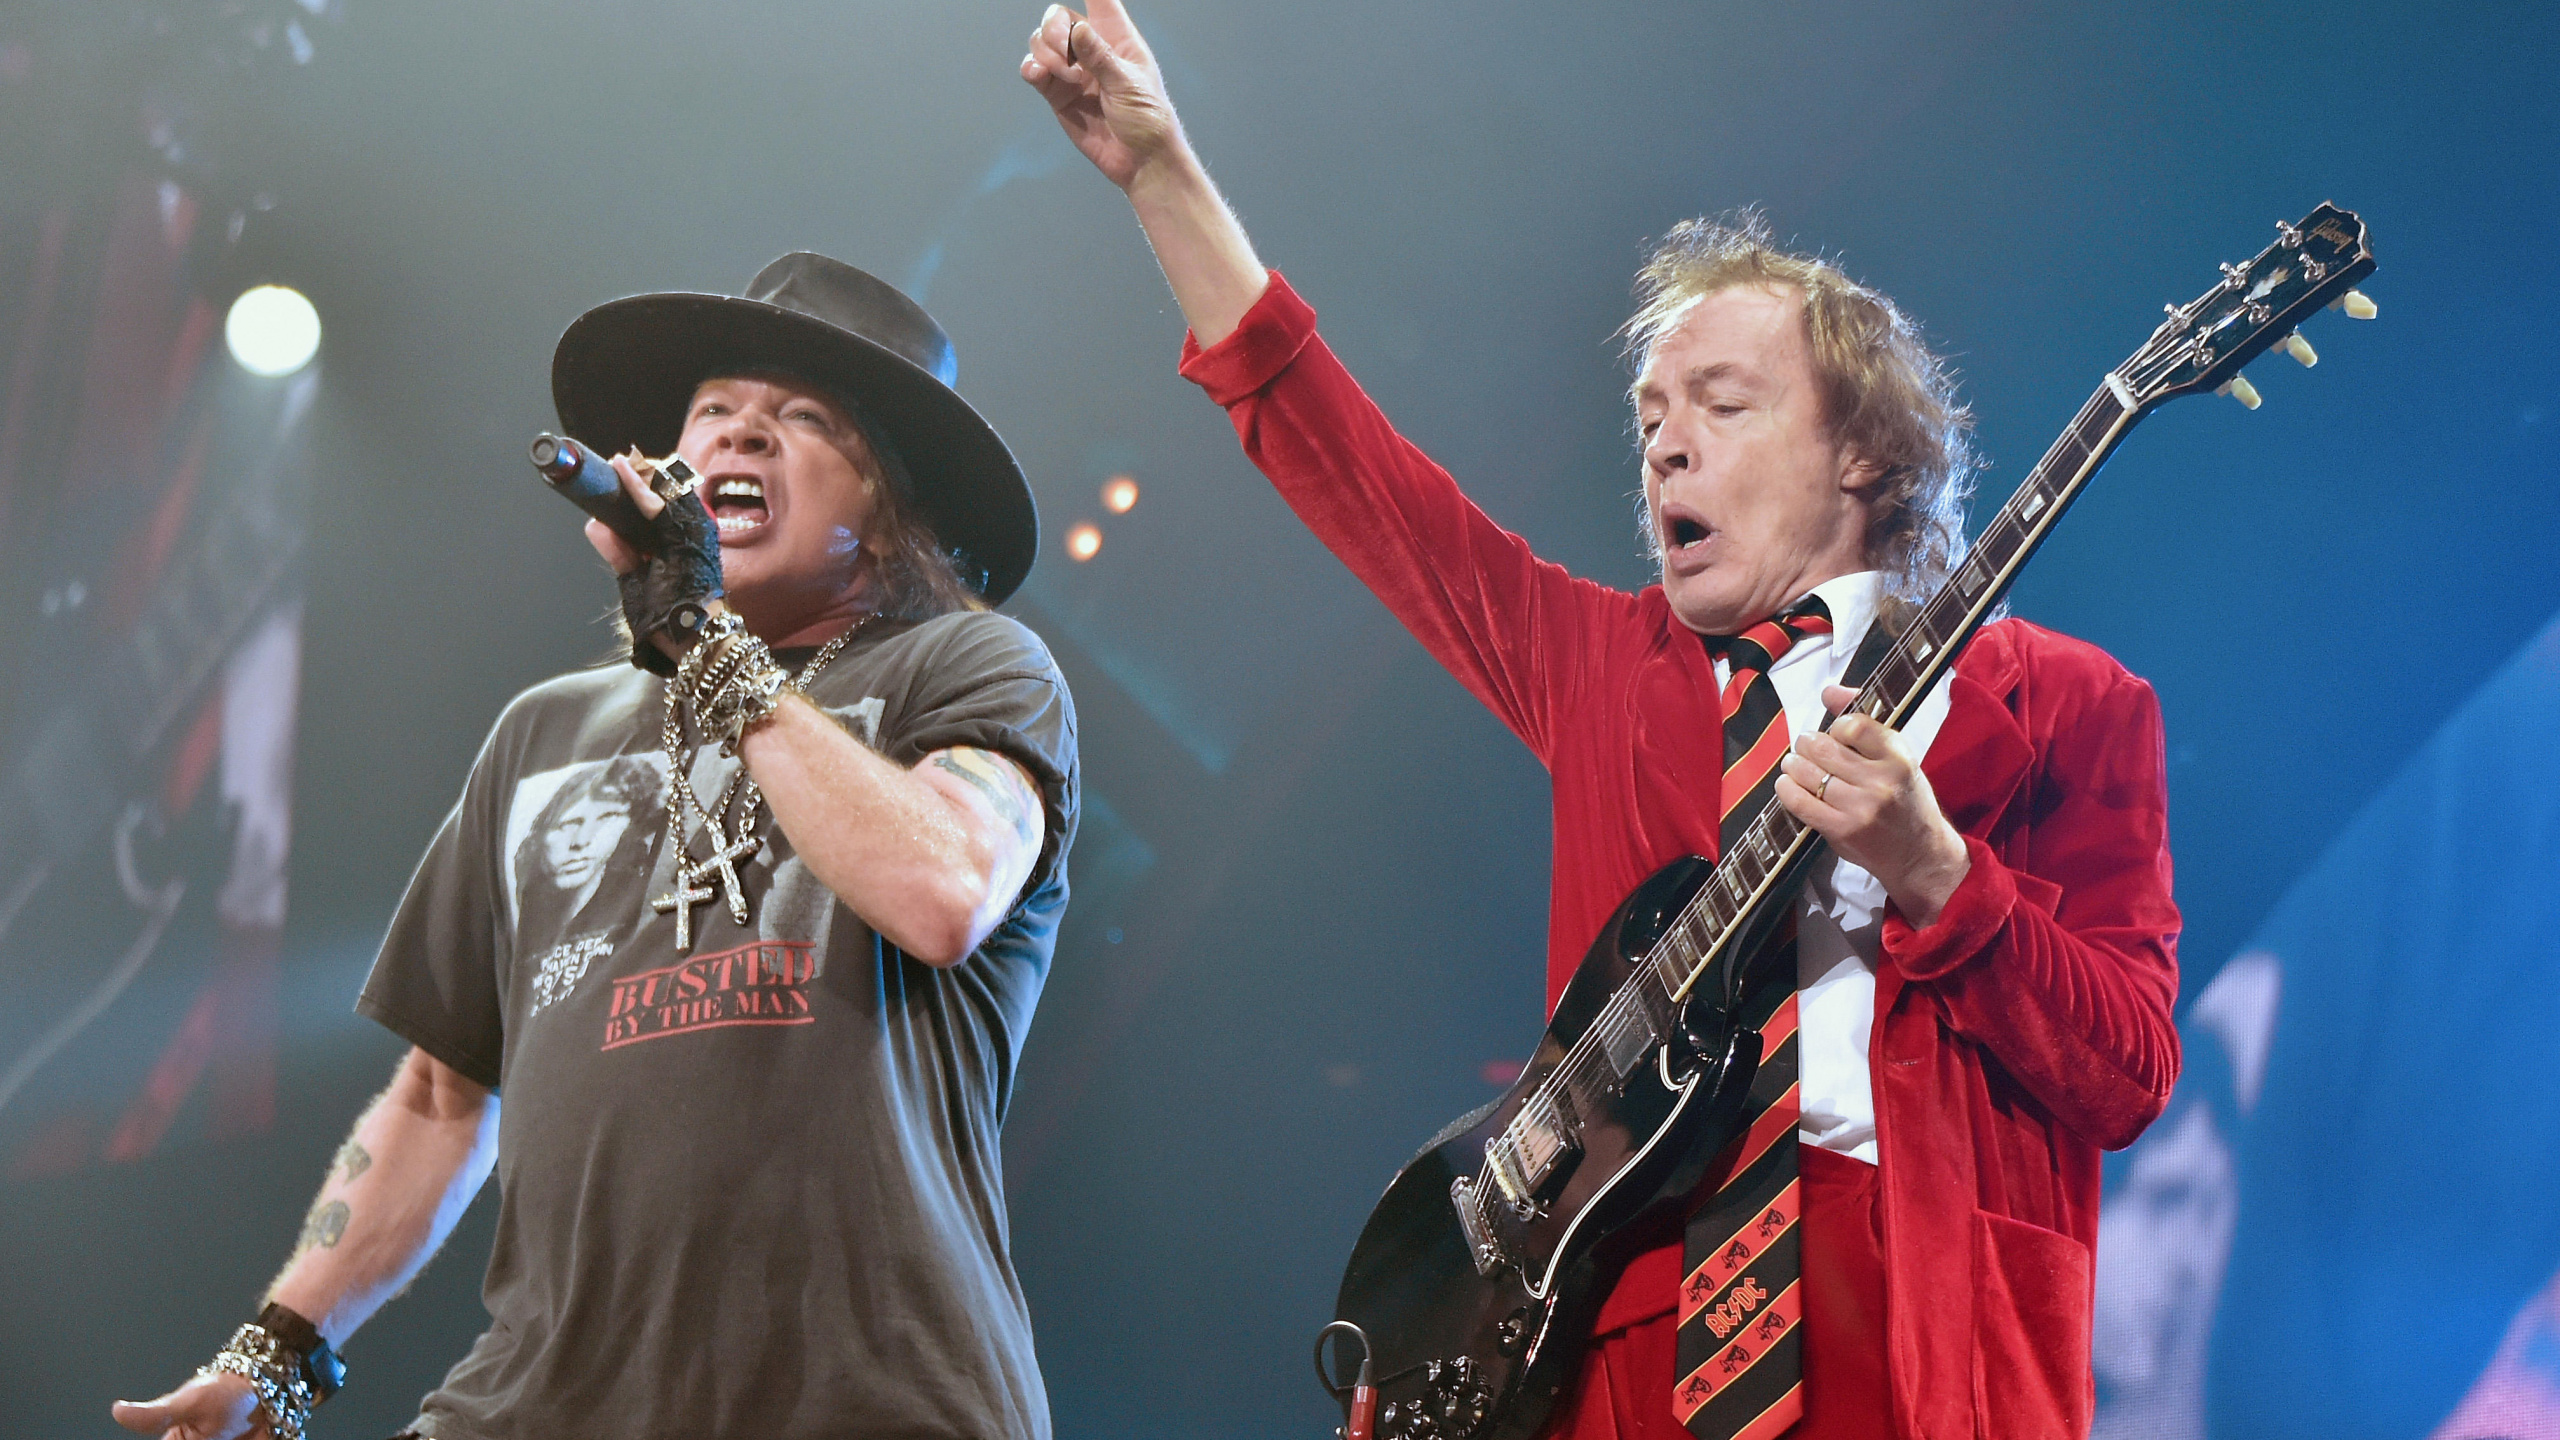 Angus Young, Concert, ac Dc, Guns N Roses, Performance. Wallpaper in 2560x1440 Resolution